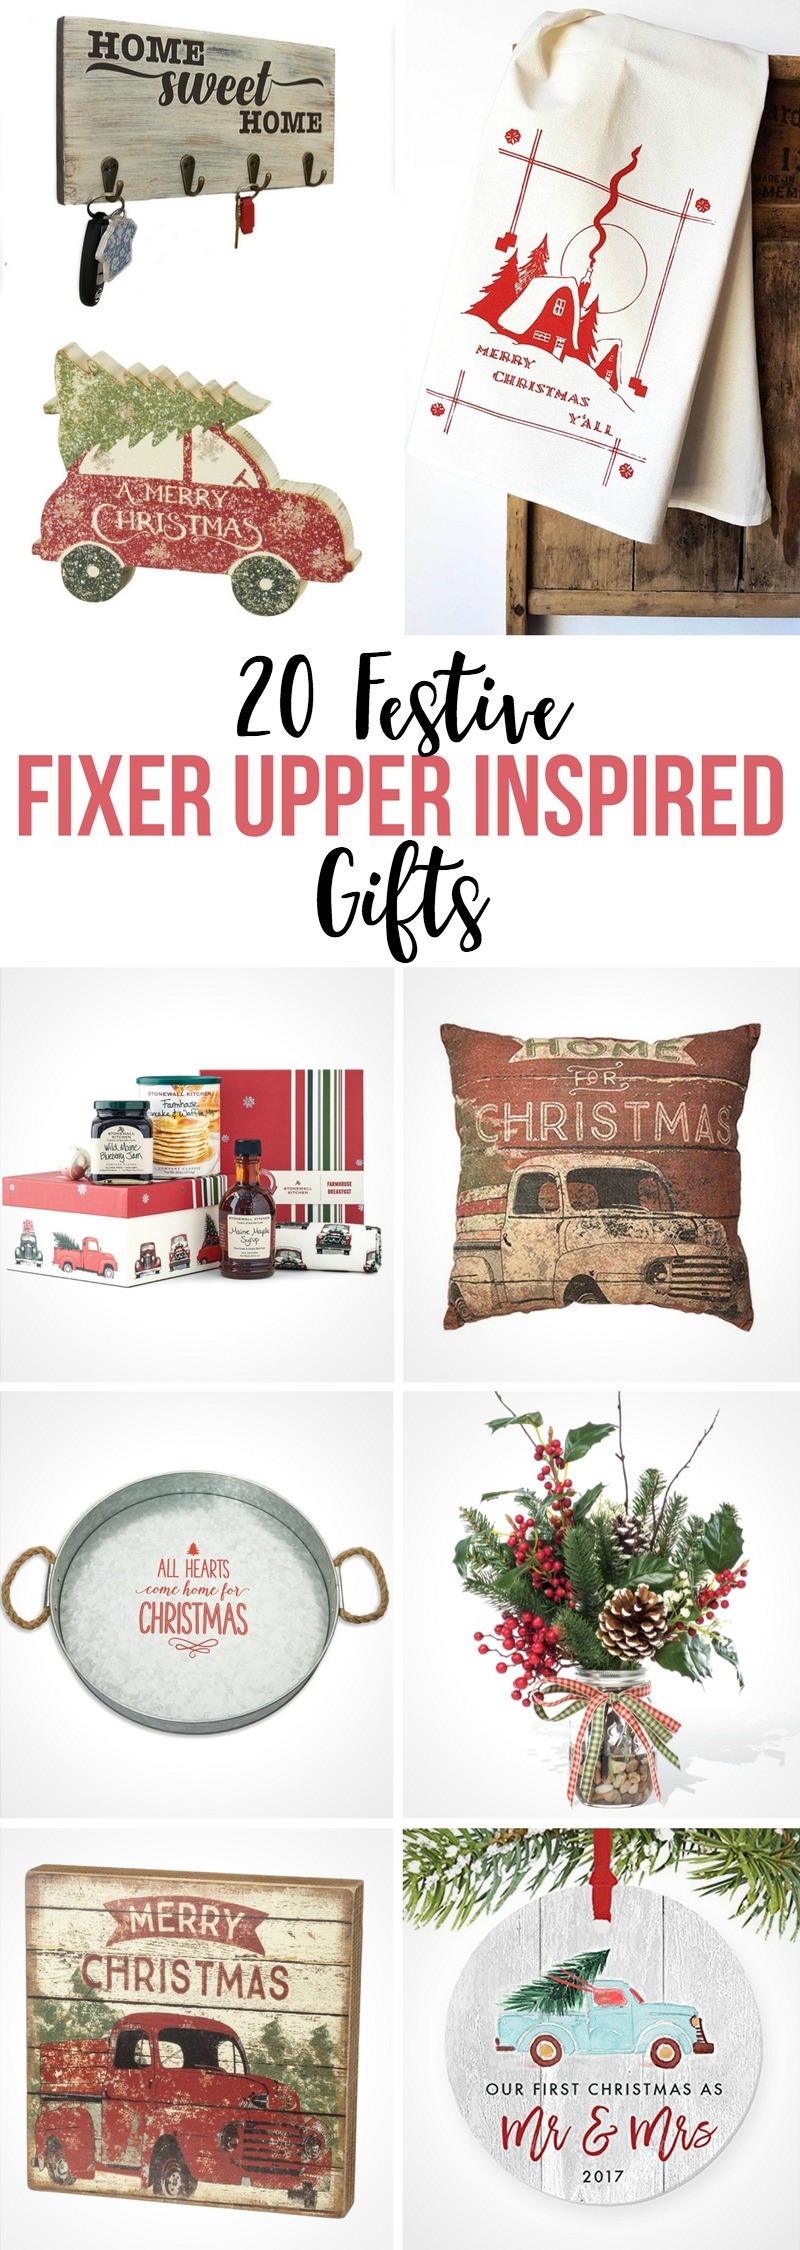 Modern Country Gifts to Give for Christmas